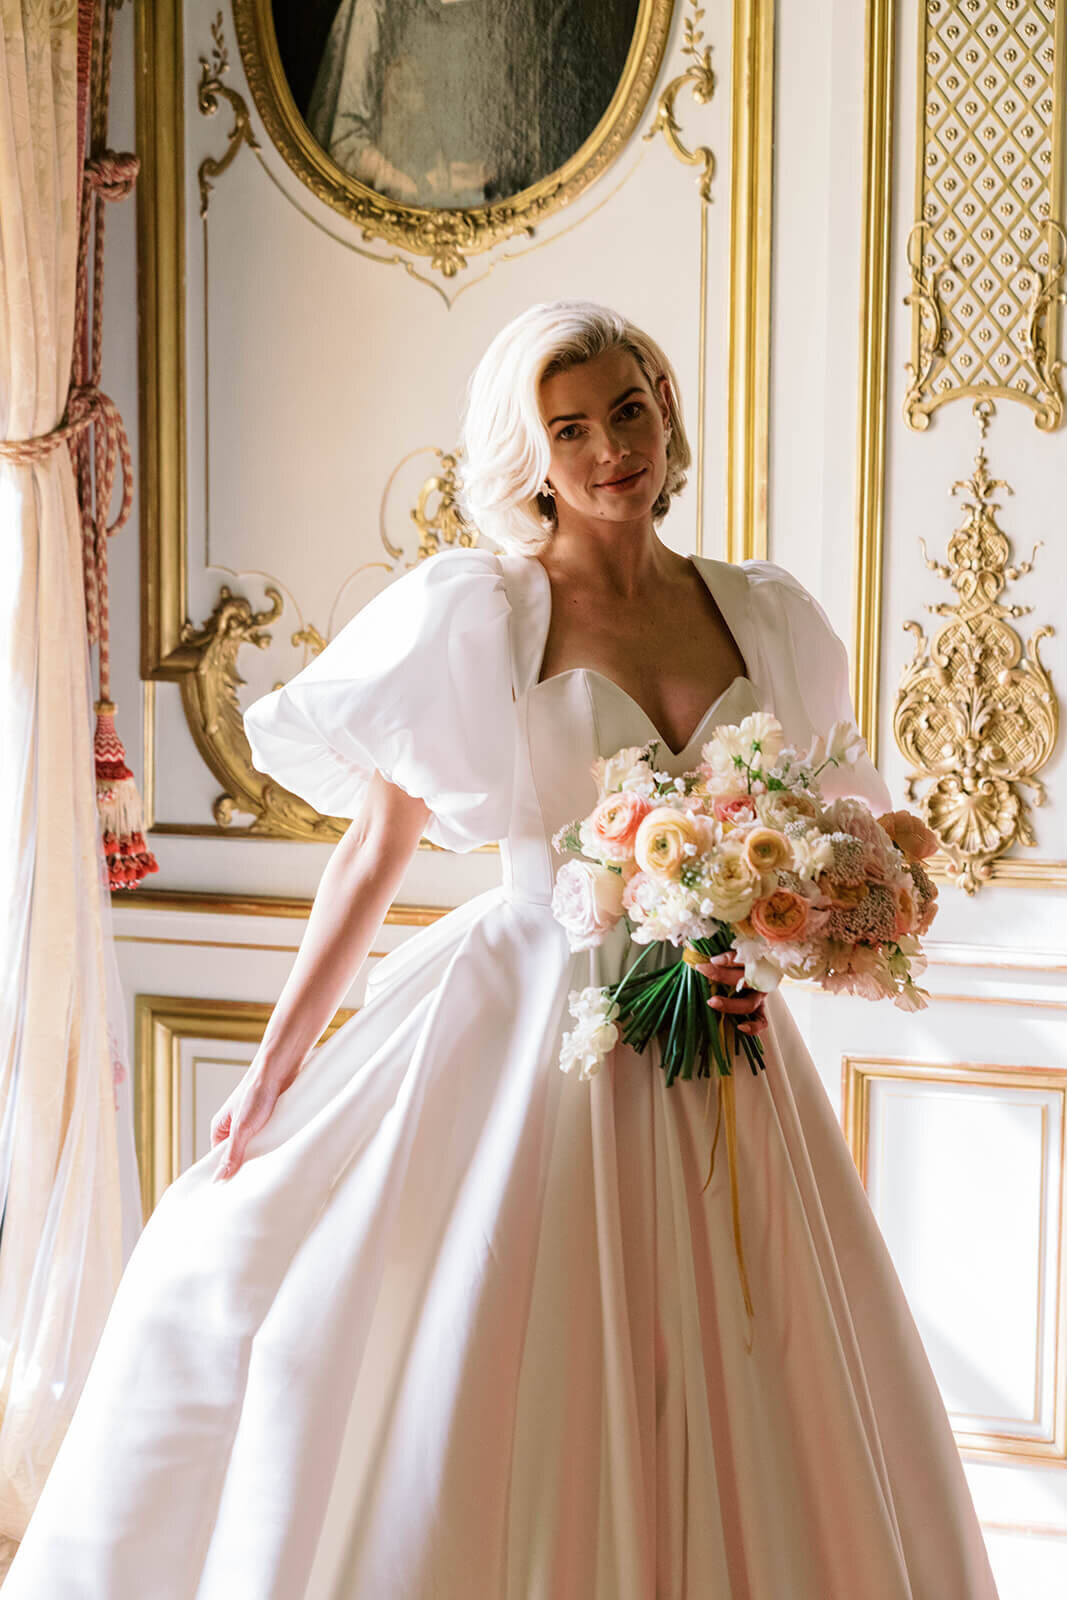 bride standing in blenheim palace wearing a luxury wedding dress with large puffed sleeves holding a peach wedding bouquet